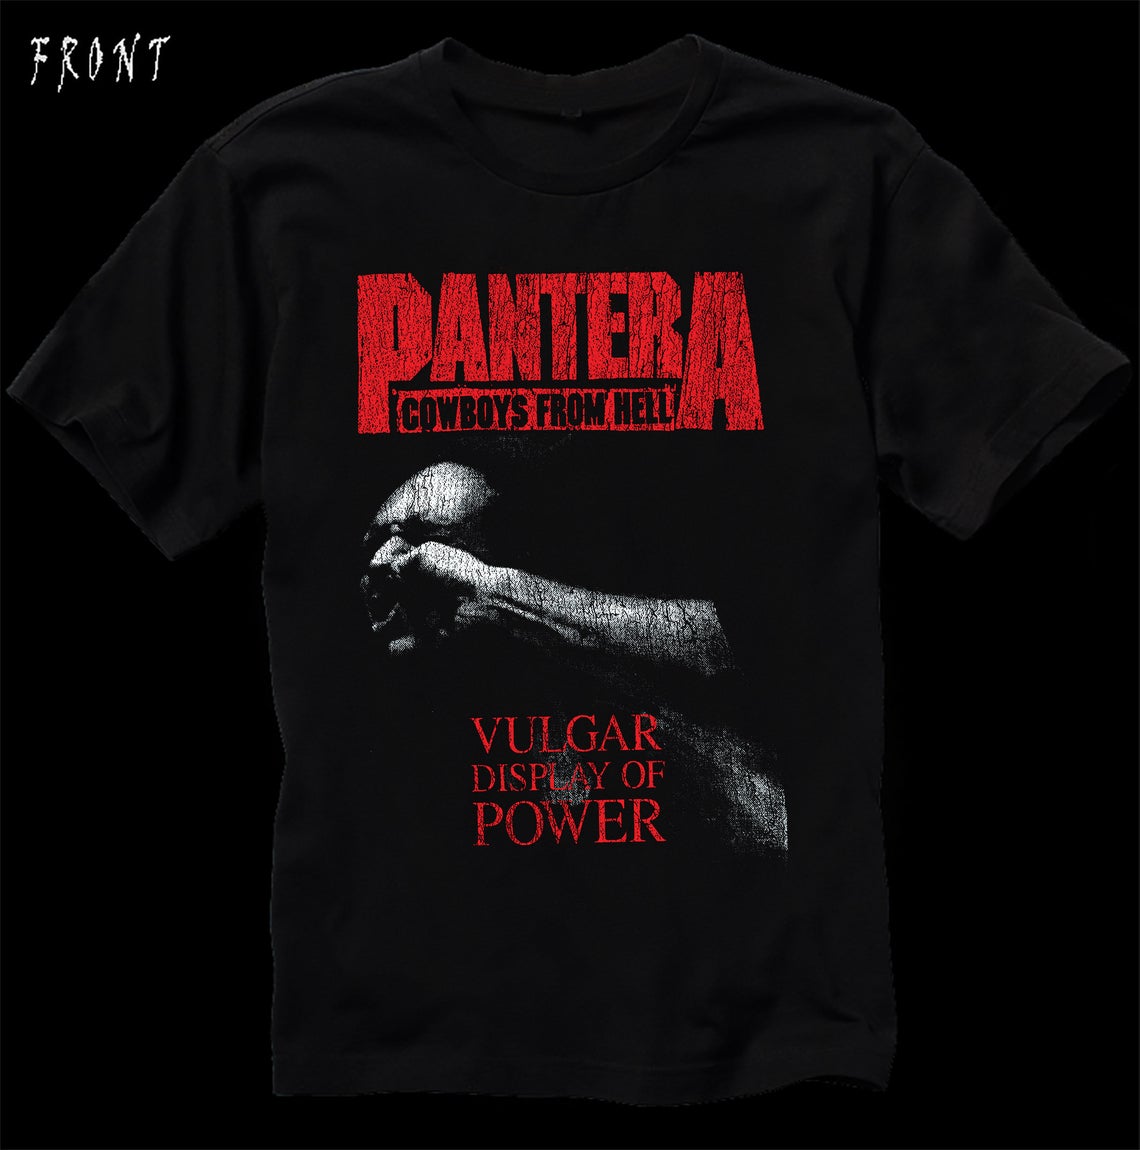 ballet Unfavorable booklet Pantera - Cowboys from Hell - Vulgar Display of Power - American Groove  Metal Band T-Shirt - SquadTee.com